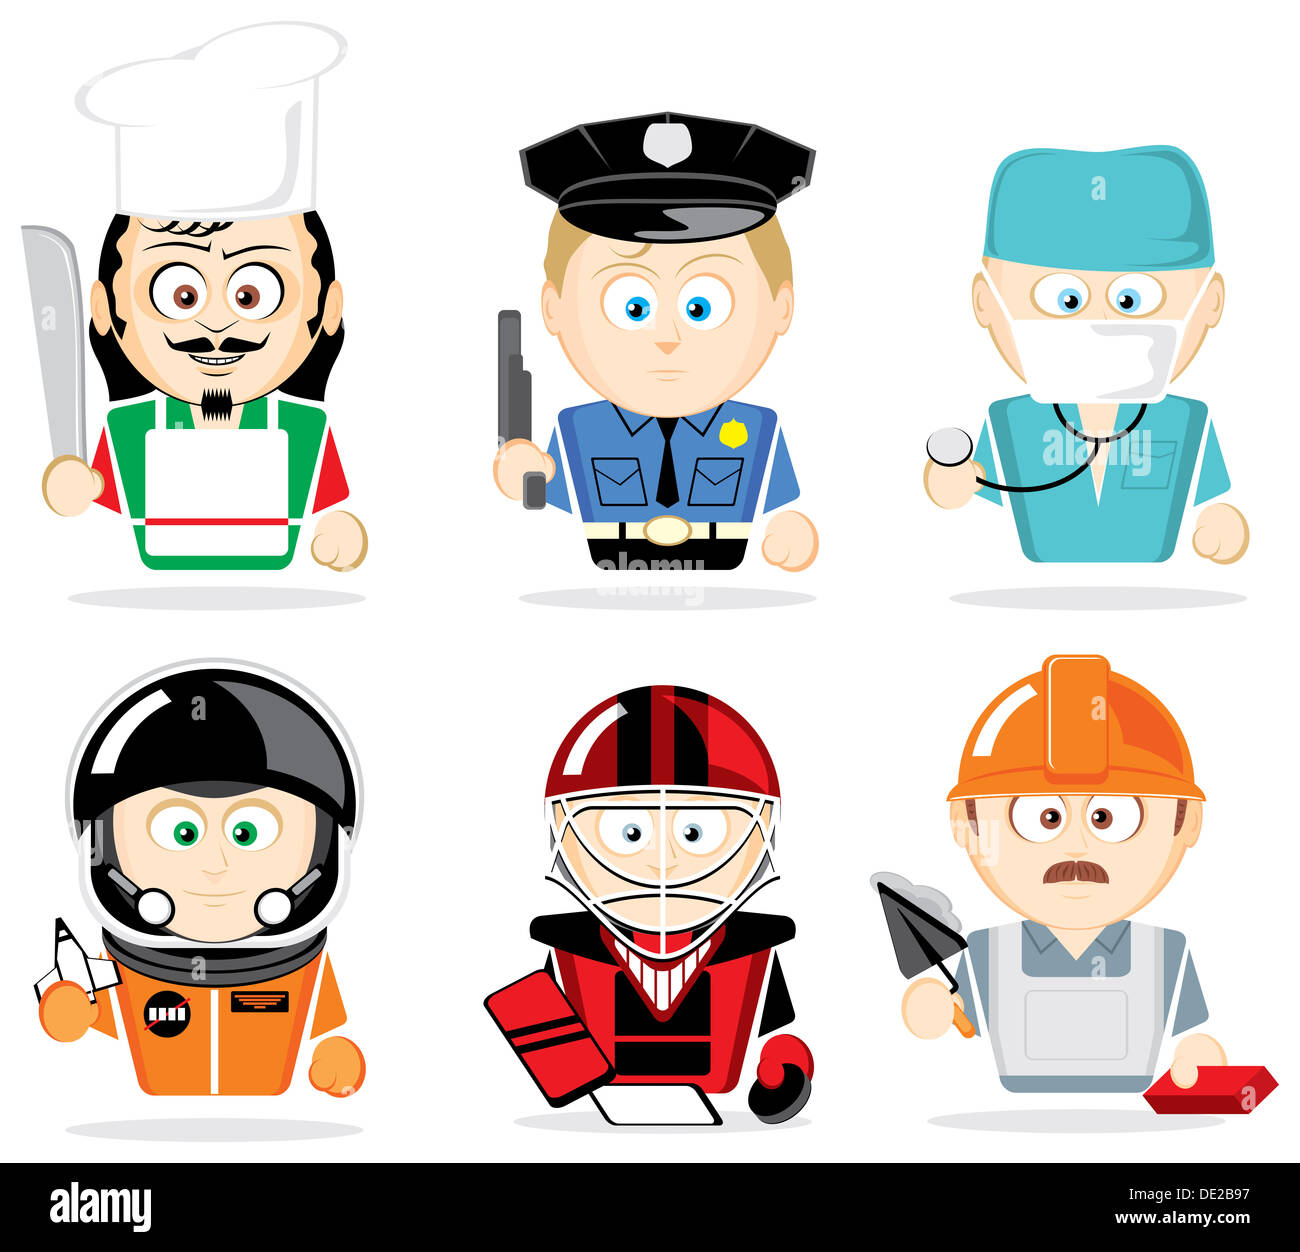 Funny illustration of famous professions Stock Photo